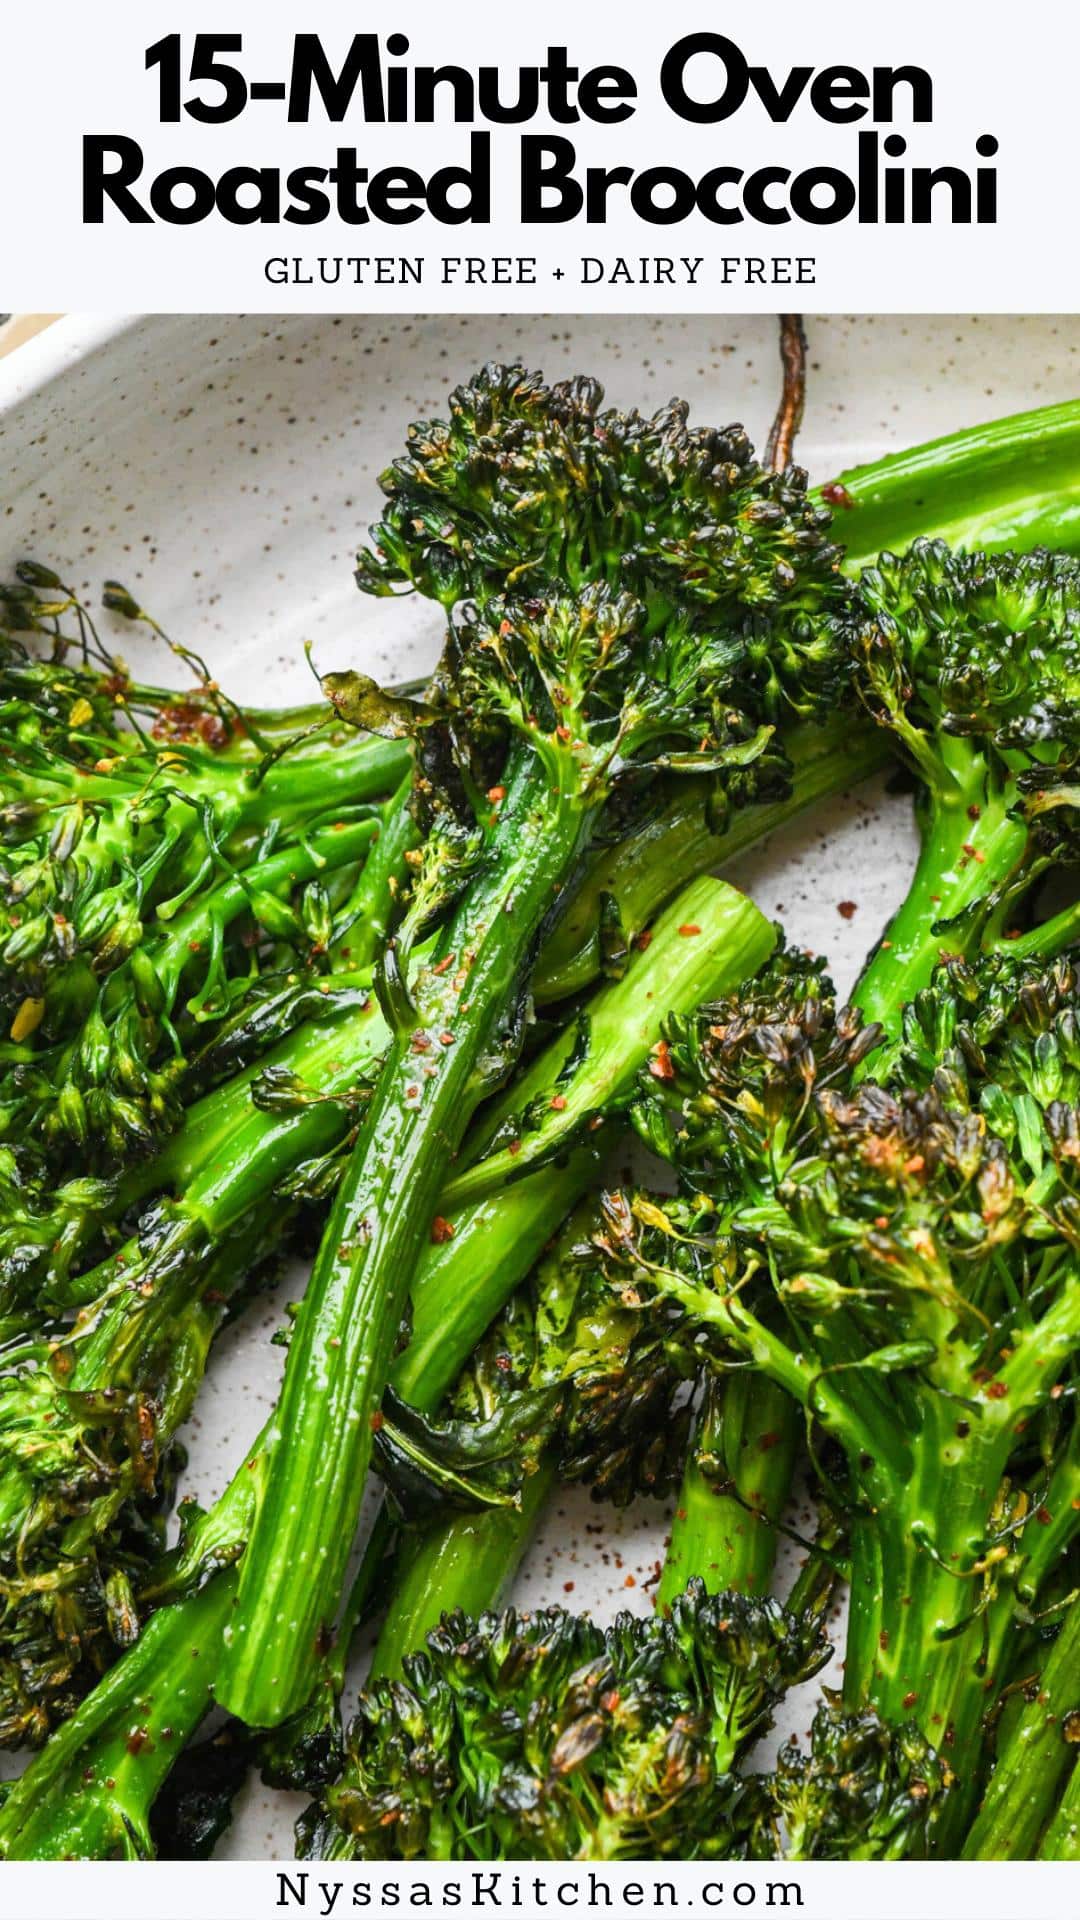 This 15-minute oven roasted broccolini is the best quick side dish that pairs well with so many meals! It’s one of our all-time favorites when we need a simple veggie recipe to serve with dinner. Made with broccolini (also sometimes called baby broccoli), olive oil, and a few simple spices – it cooks quickly in the oven on a sheet pan until tender with slightly charred florets. The recipe is not only delicious but also nutrient-dense, gluten-free, dairy-free, Whole30 compatible, and paleo-friendly!